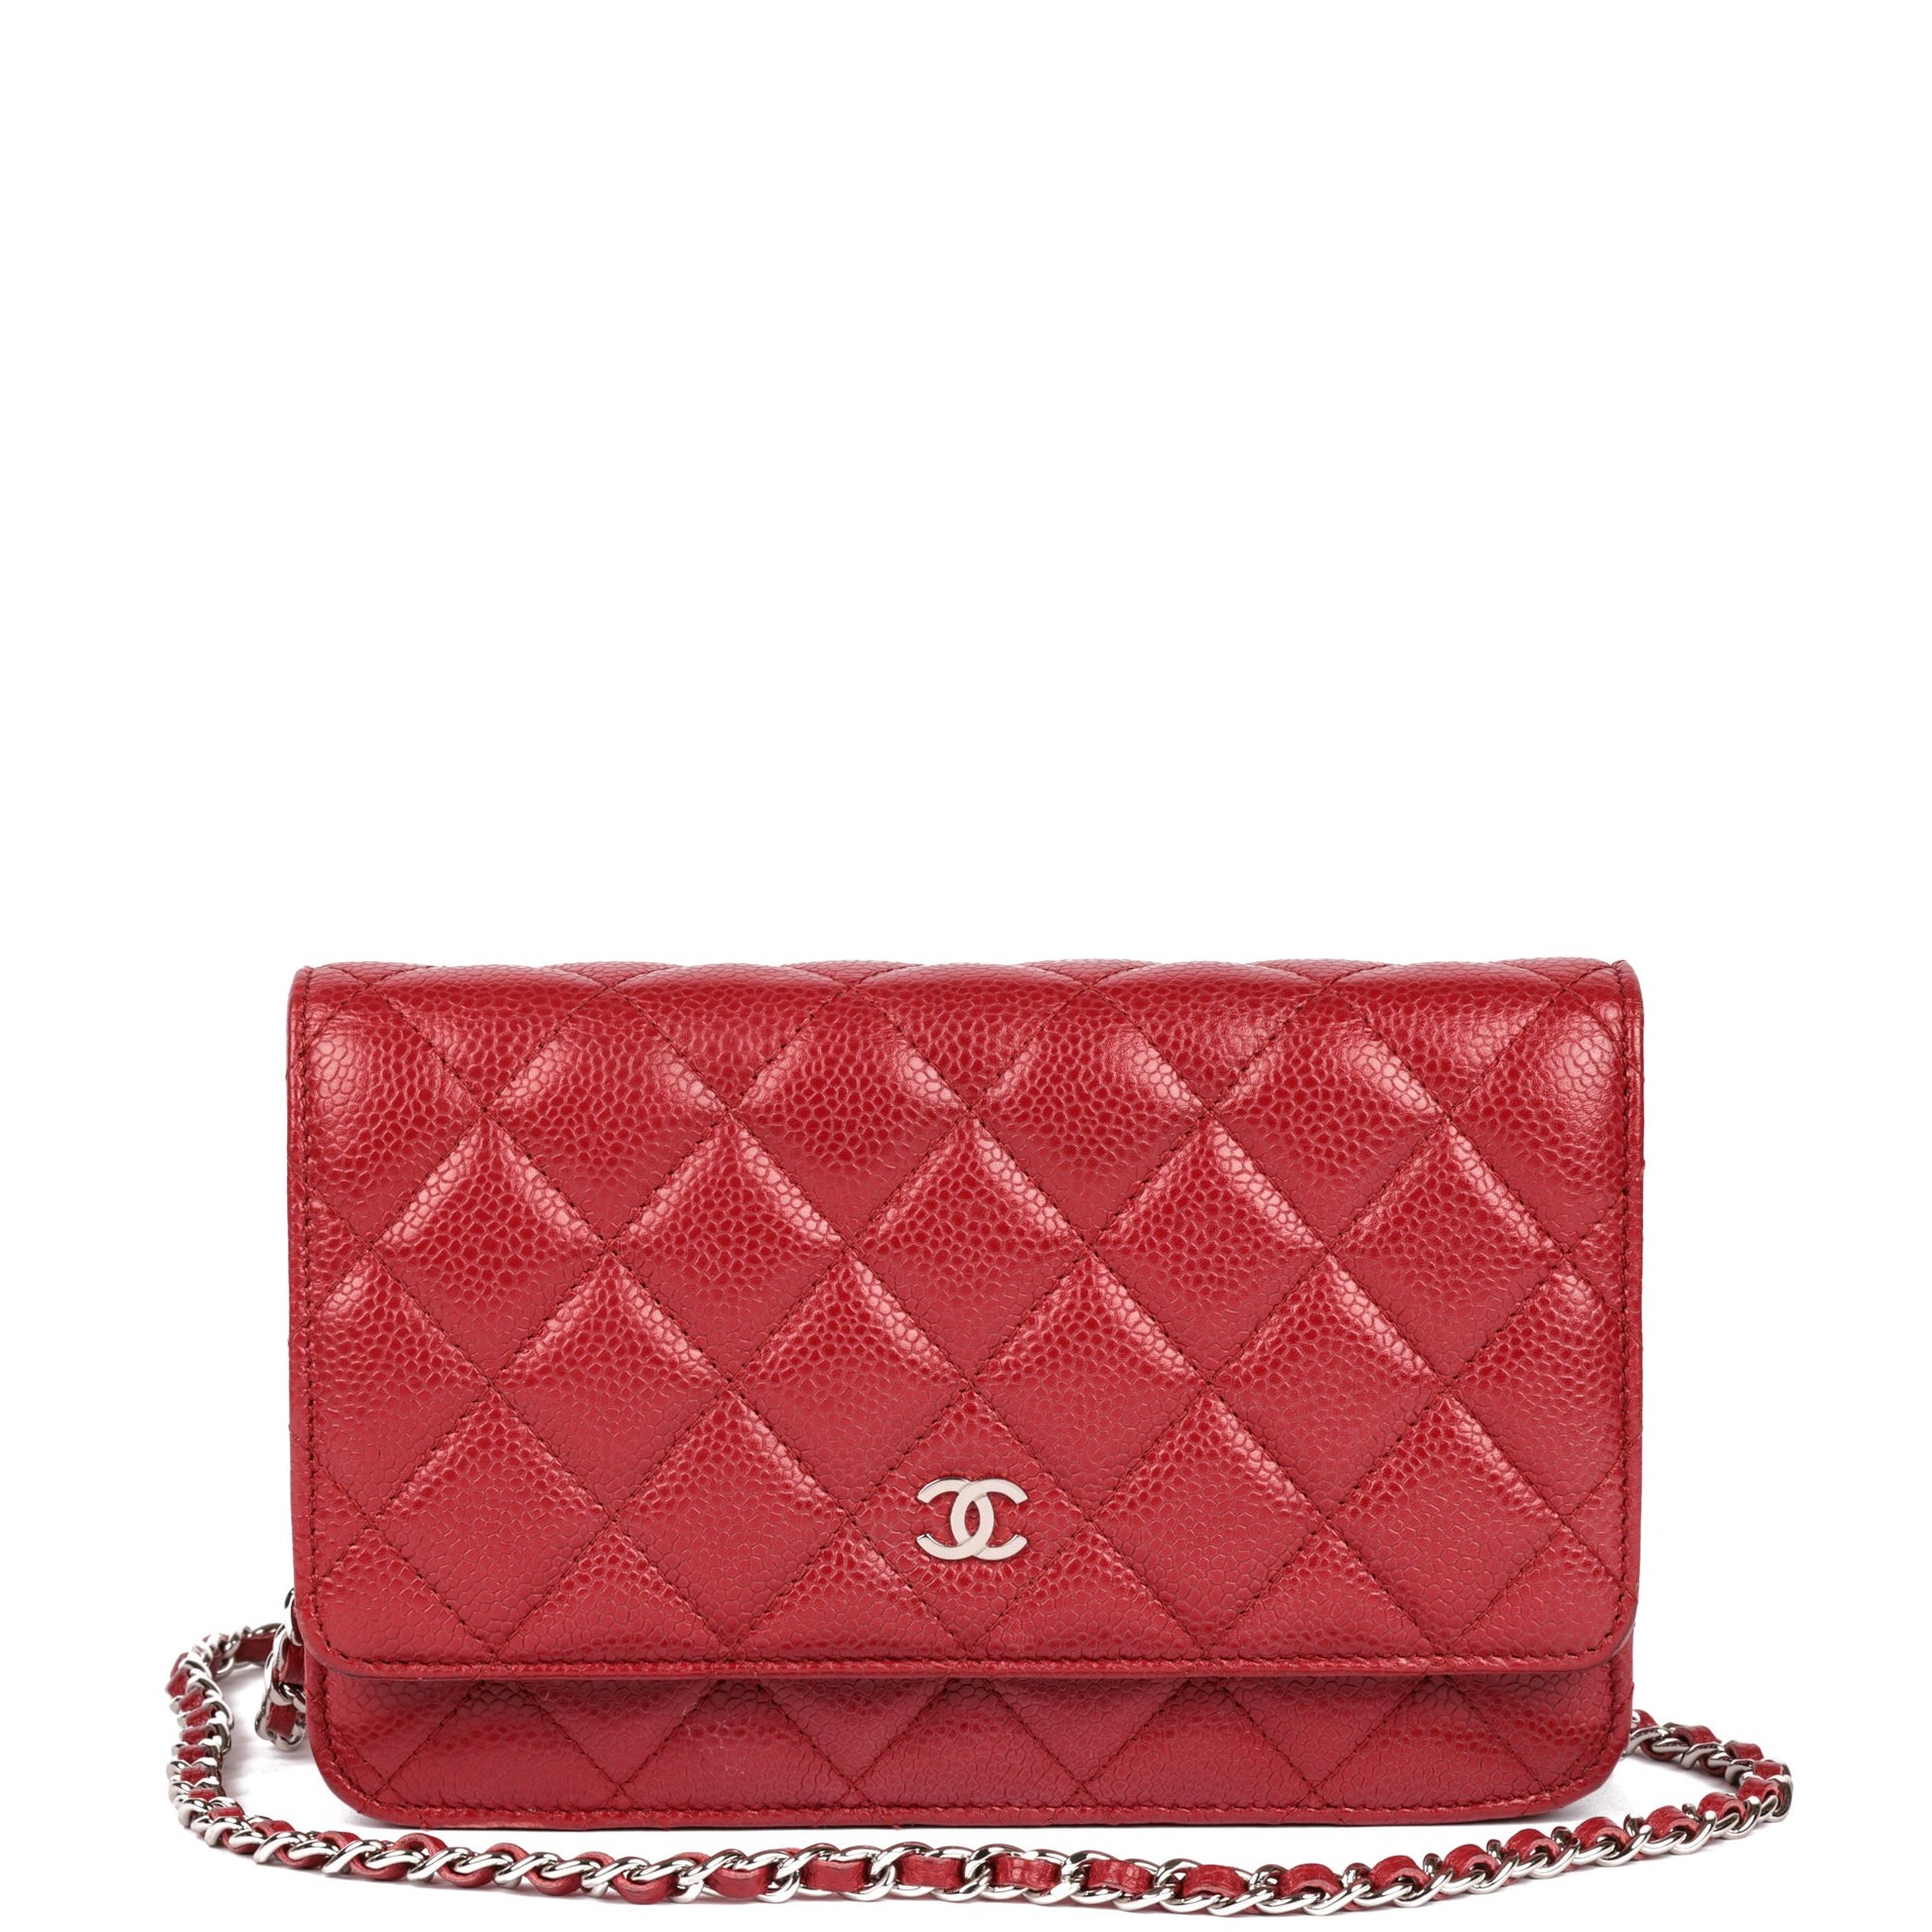 Chanel Red Quilted Caviar Leather Wallet-on-Chain WOC Shoulder